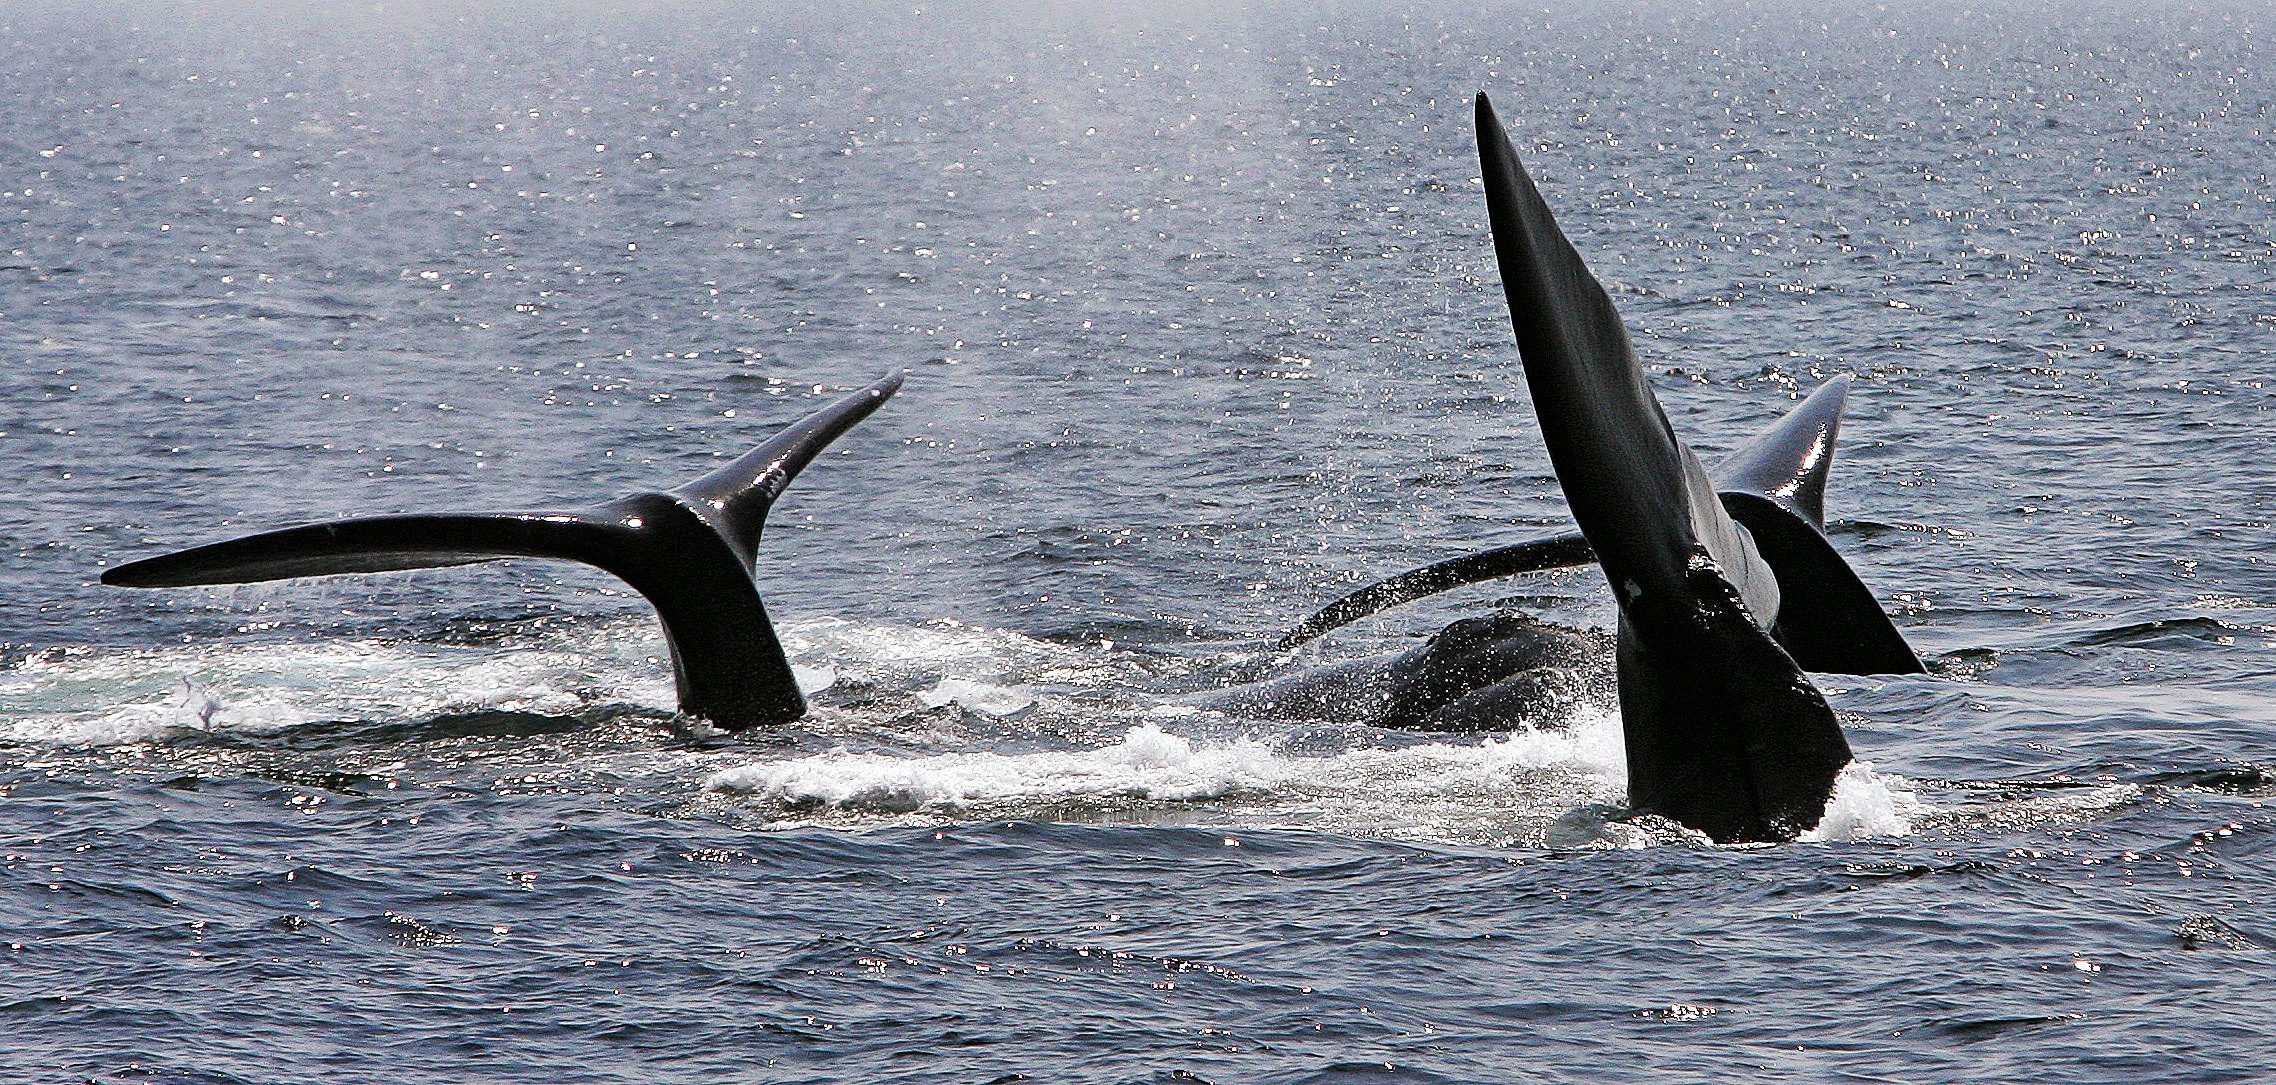 Whale survival depends on stopping rope fishing

